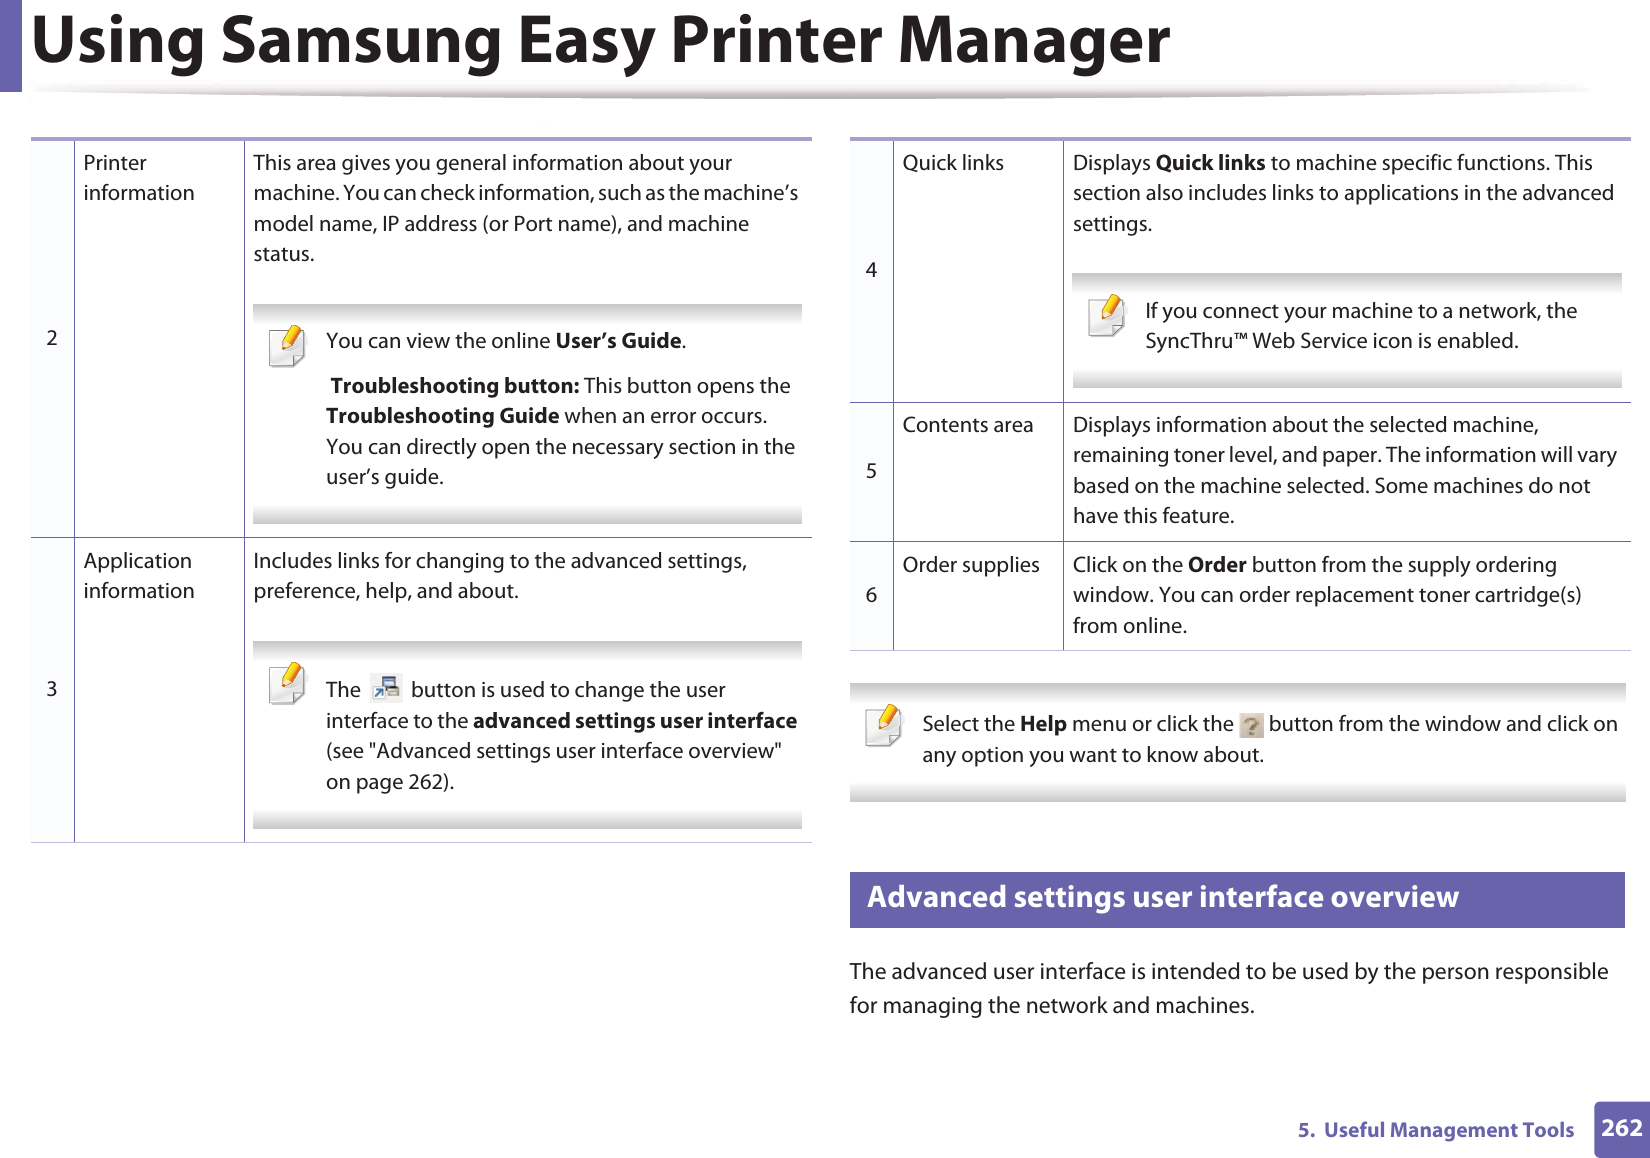 Using Samsung Easy Printer Manager2625.  Useful Management Tools Select the Help menu or click the   button from the window and click on any option you want to know about.  5 Advanced settings user interface overviewThe advanced user interface is intended to be used by the person responsible for managing the network and machines.2Printer informationThis area gives you general information about your machine. You can check information, such as the machine’s model name, IP address (or Port name), and machine status. You can view the online User’s Guide. Troubleshooting button: This button opens the Troubleshooting Guide when an error occurs. You can directly open the necessary section in the user’s guide.  3Application informationIncludes links for changing to the advanced settings, preference, help, and about. The   button is used to change the user interface to the advanced settings user interface (see &quot;Advanced settings user interface overview&quot; on page 262). 4Quick links Displays Quick links to machine specific functions. This section also includes links to applications in the advanced settings. If you connect your machine to a network, the SyncThru™ Web Service icon is enabled. 5Contents area Displays information about the selected machine, remaining toner level, and paper. The information will vary based on the machine selected. Some machines do not have this feature.6Order supplies Click on the Order button from the supply ordering window. You can order replacement toner cartridge(s) from online.